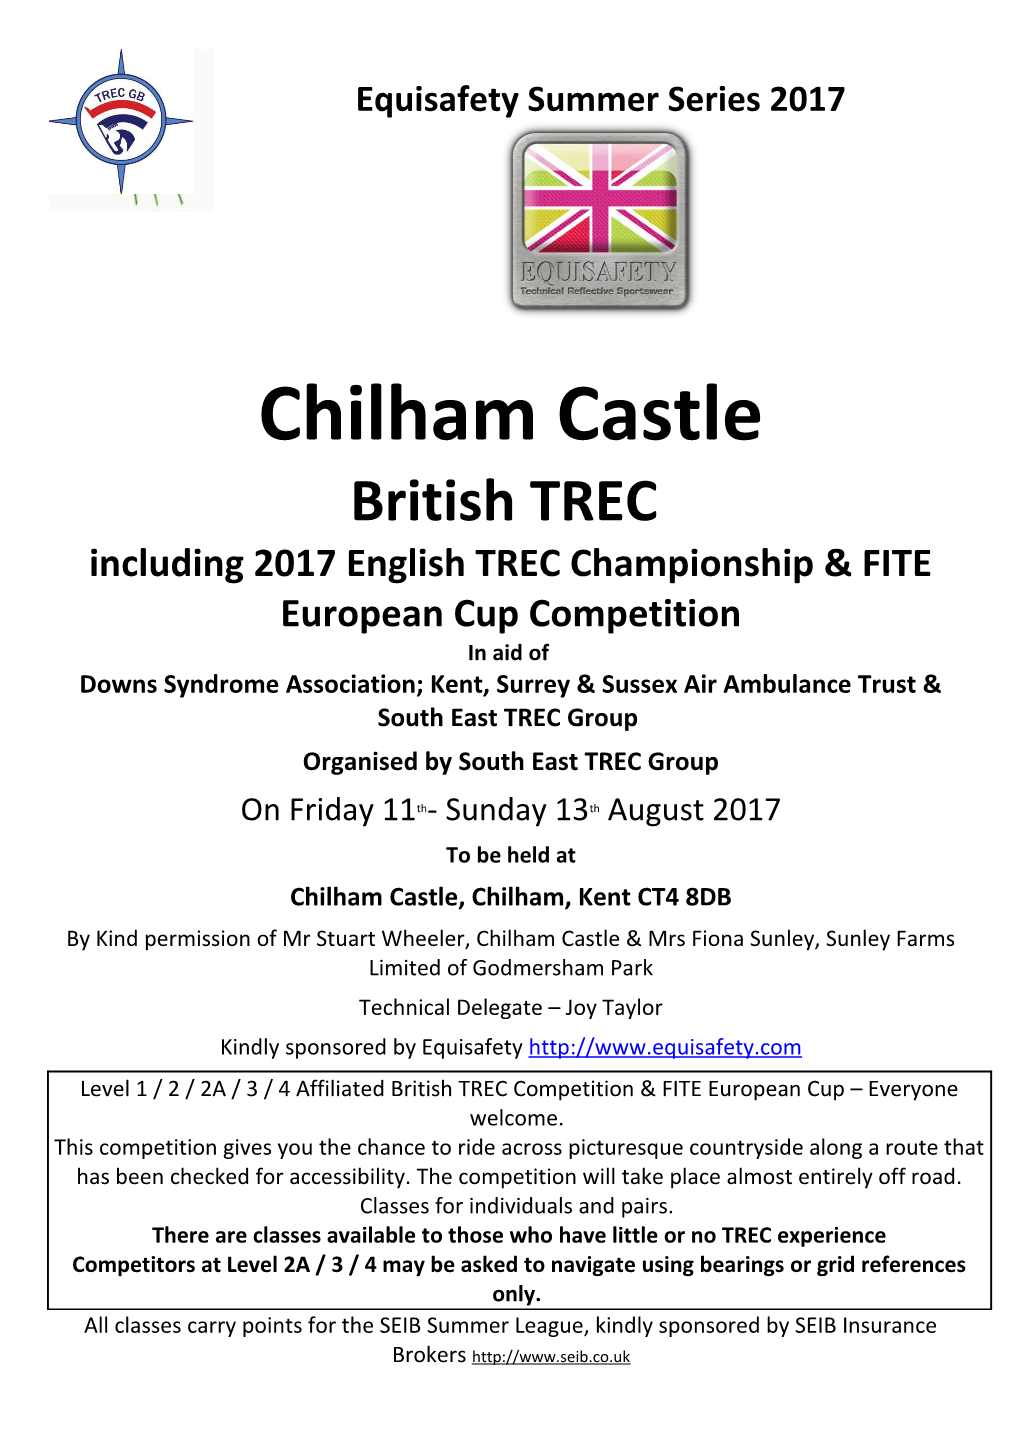 Including 2017 English TREC Championship & FITE European Cup Competition